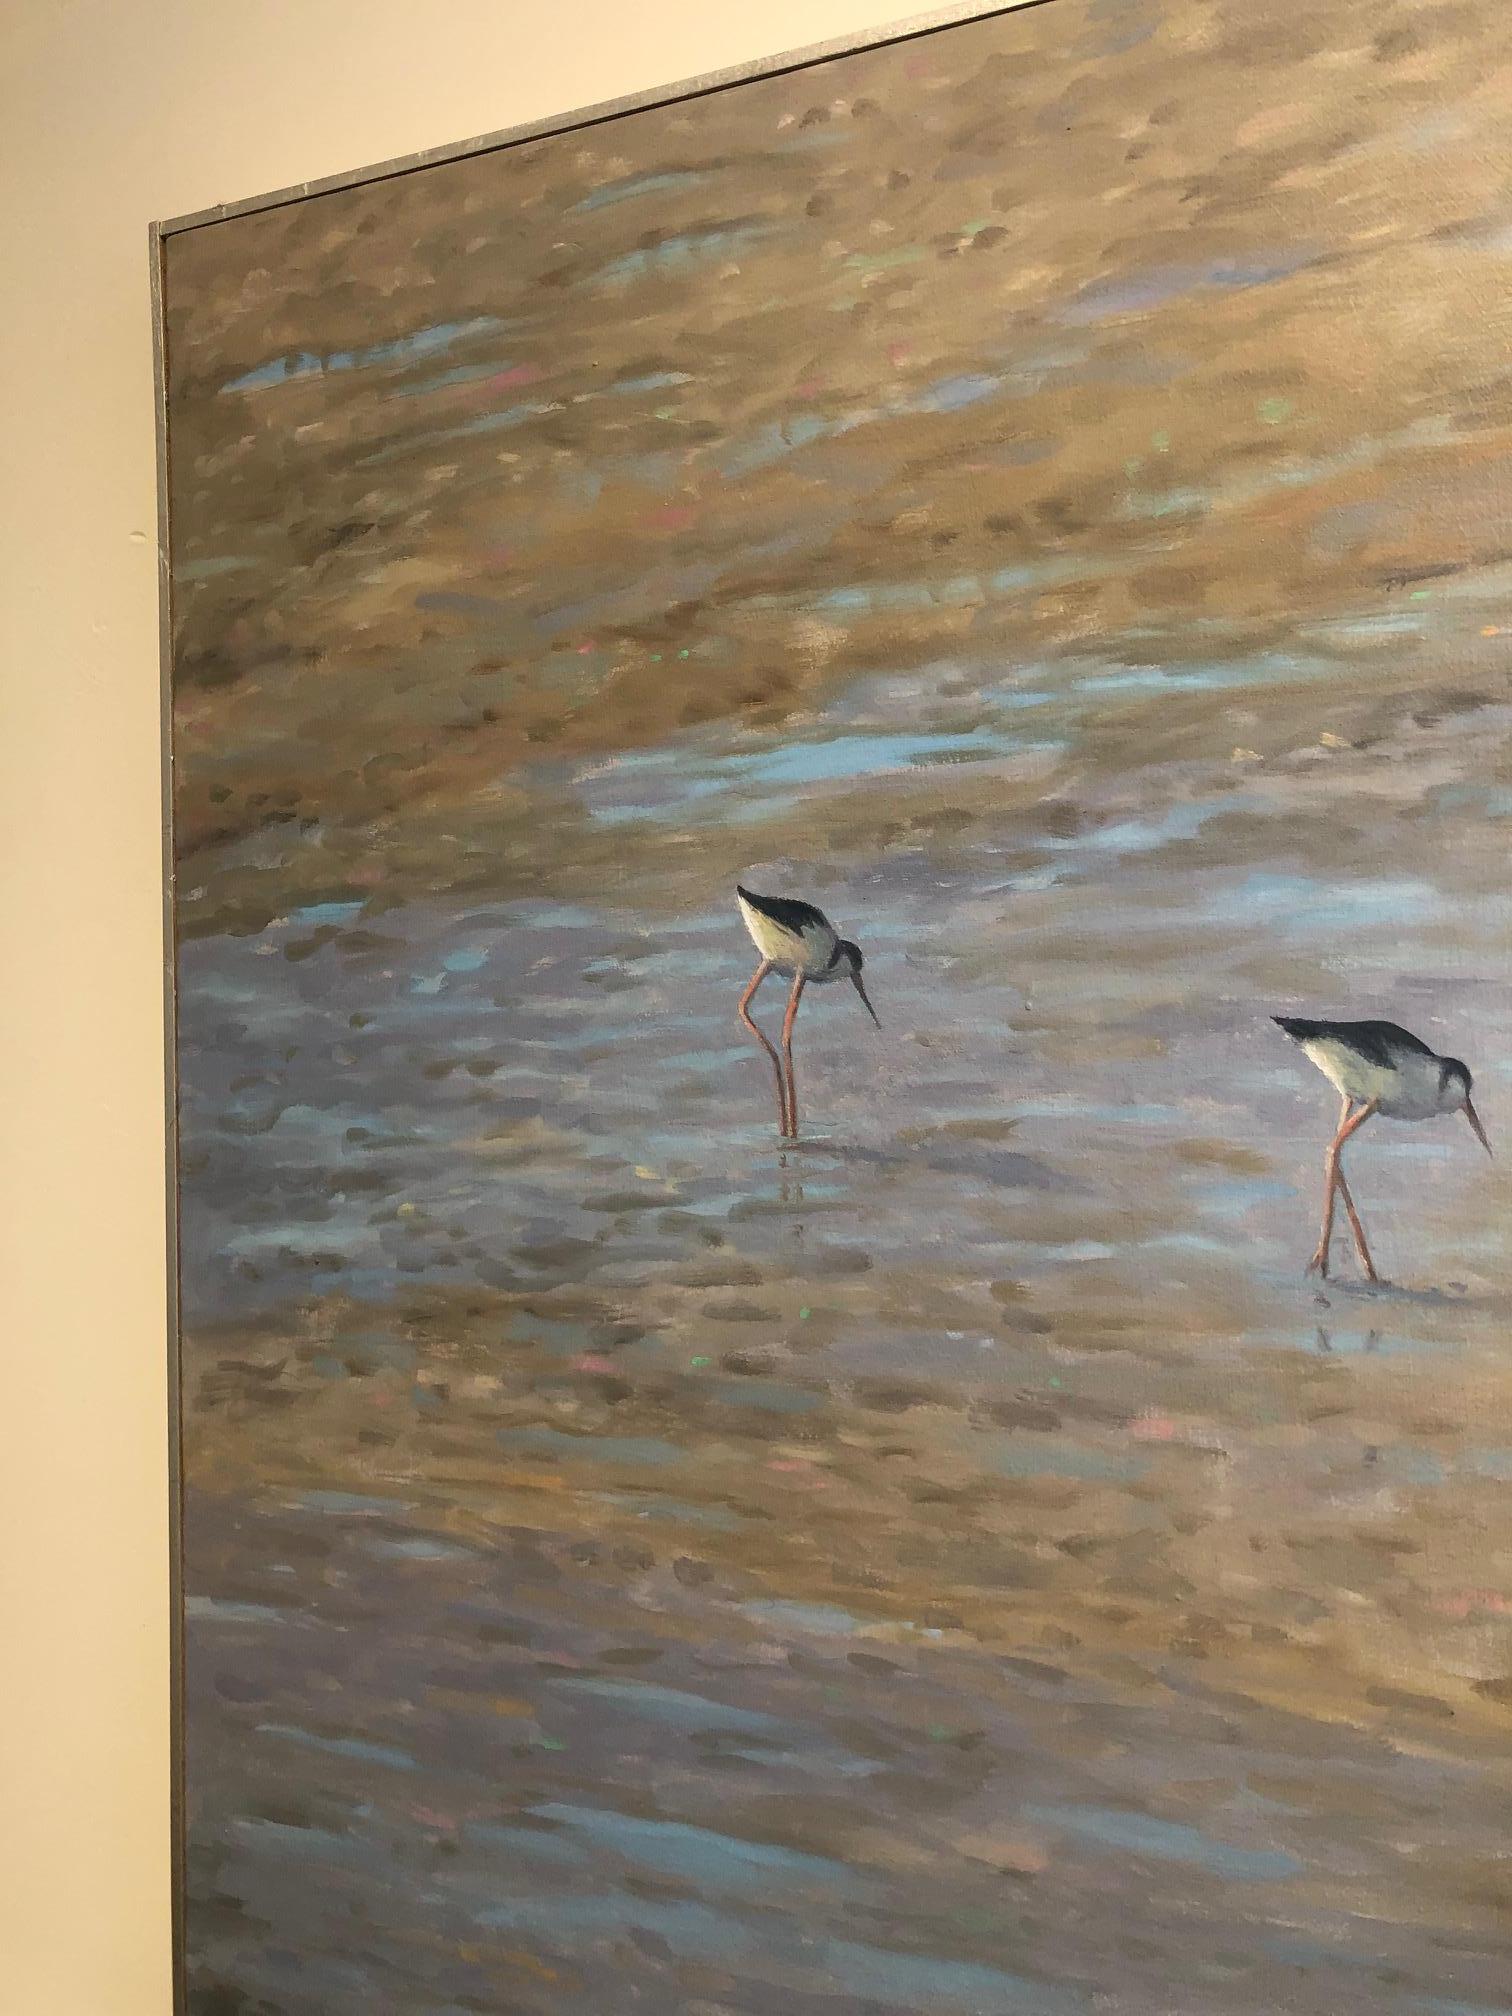 Two Shore Birds - realism oil on canvas painting - bird nature - Contemporary Painting by Willard Dixon